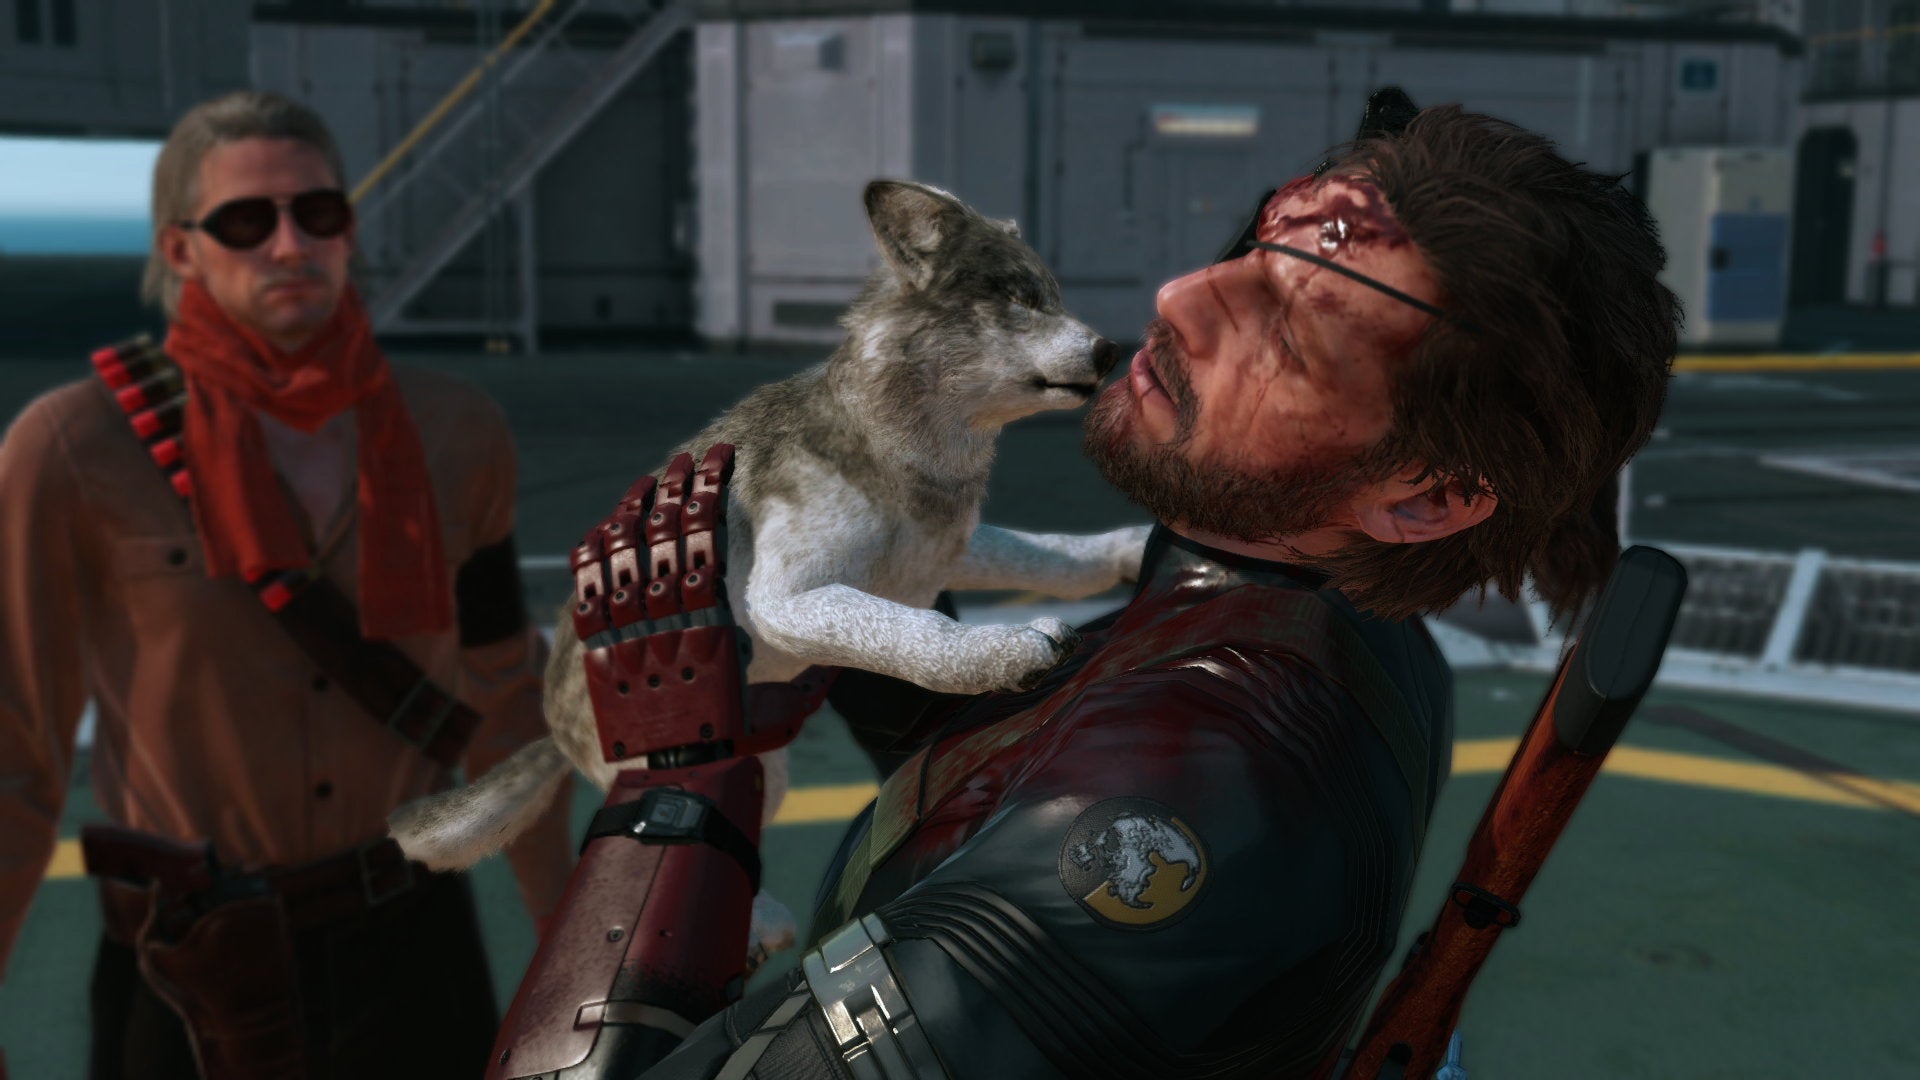 Venom Snake licked by a wolf puppy in a Metal Gear Solid V screenshot.